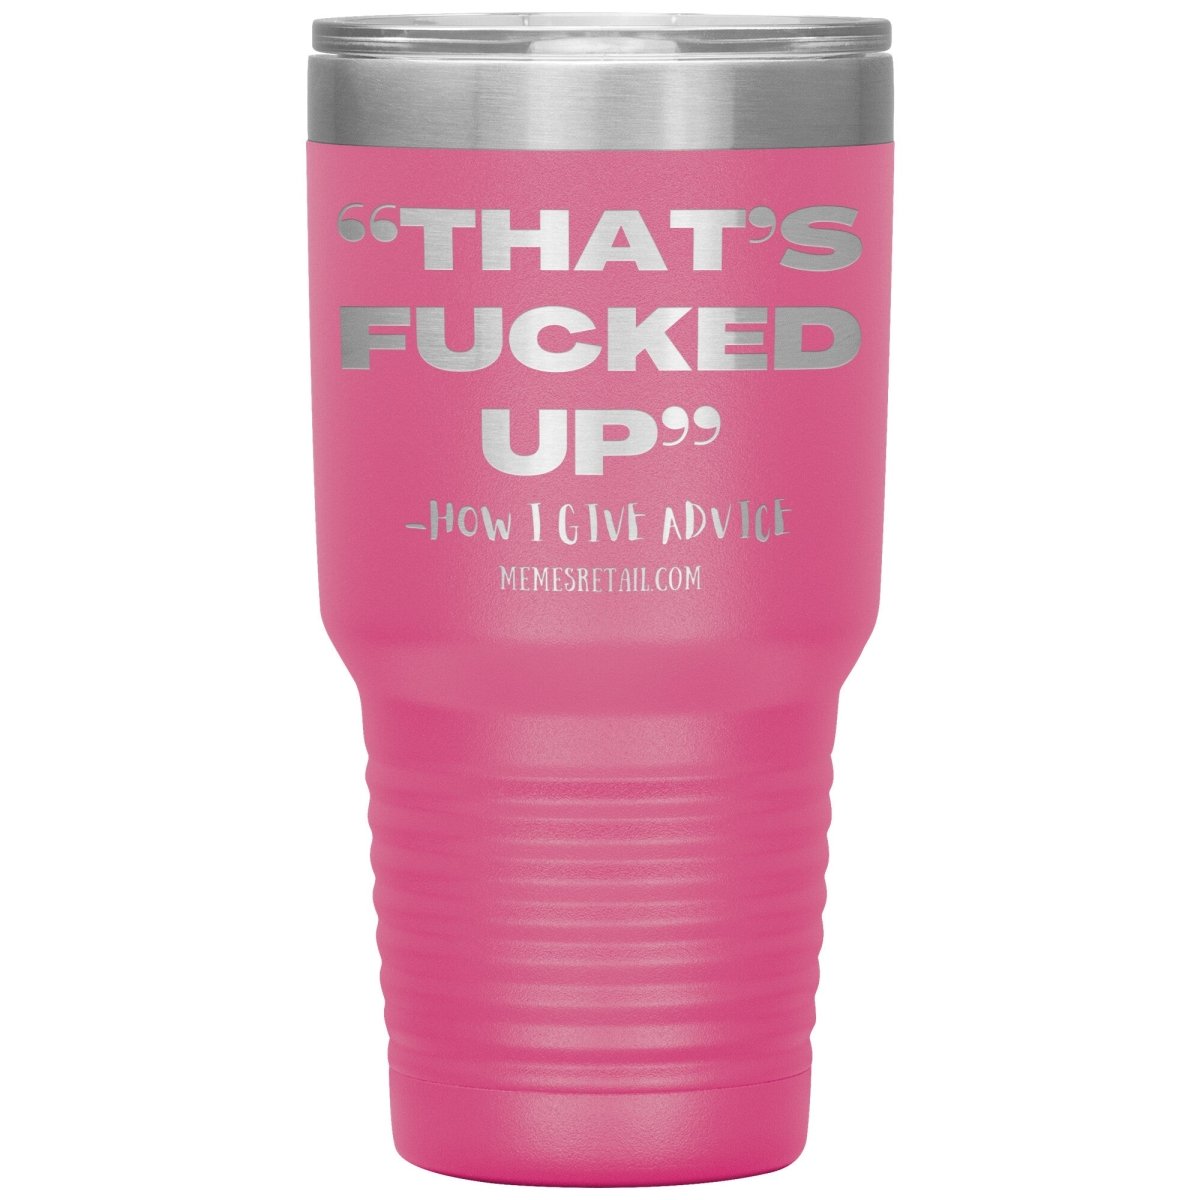 “That’s Fucked Up” -how I give advice Tumblers, 30oz Insulated Tumbler / Pink - MemesRetail.com